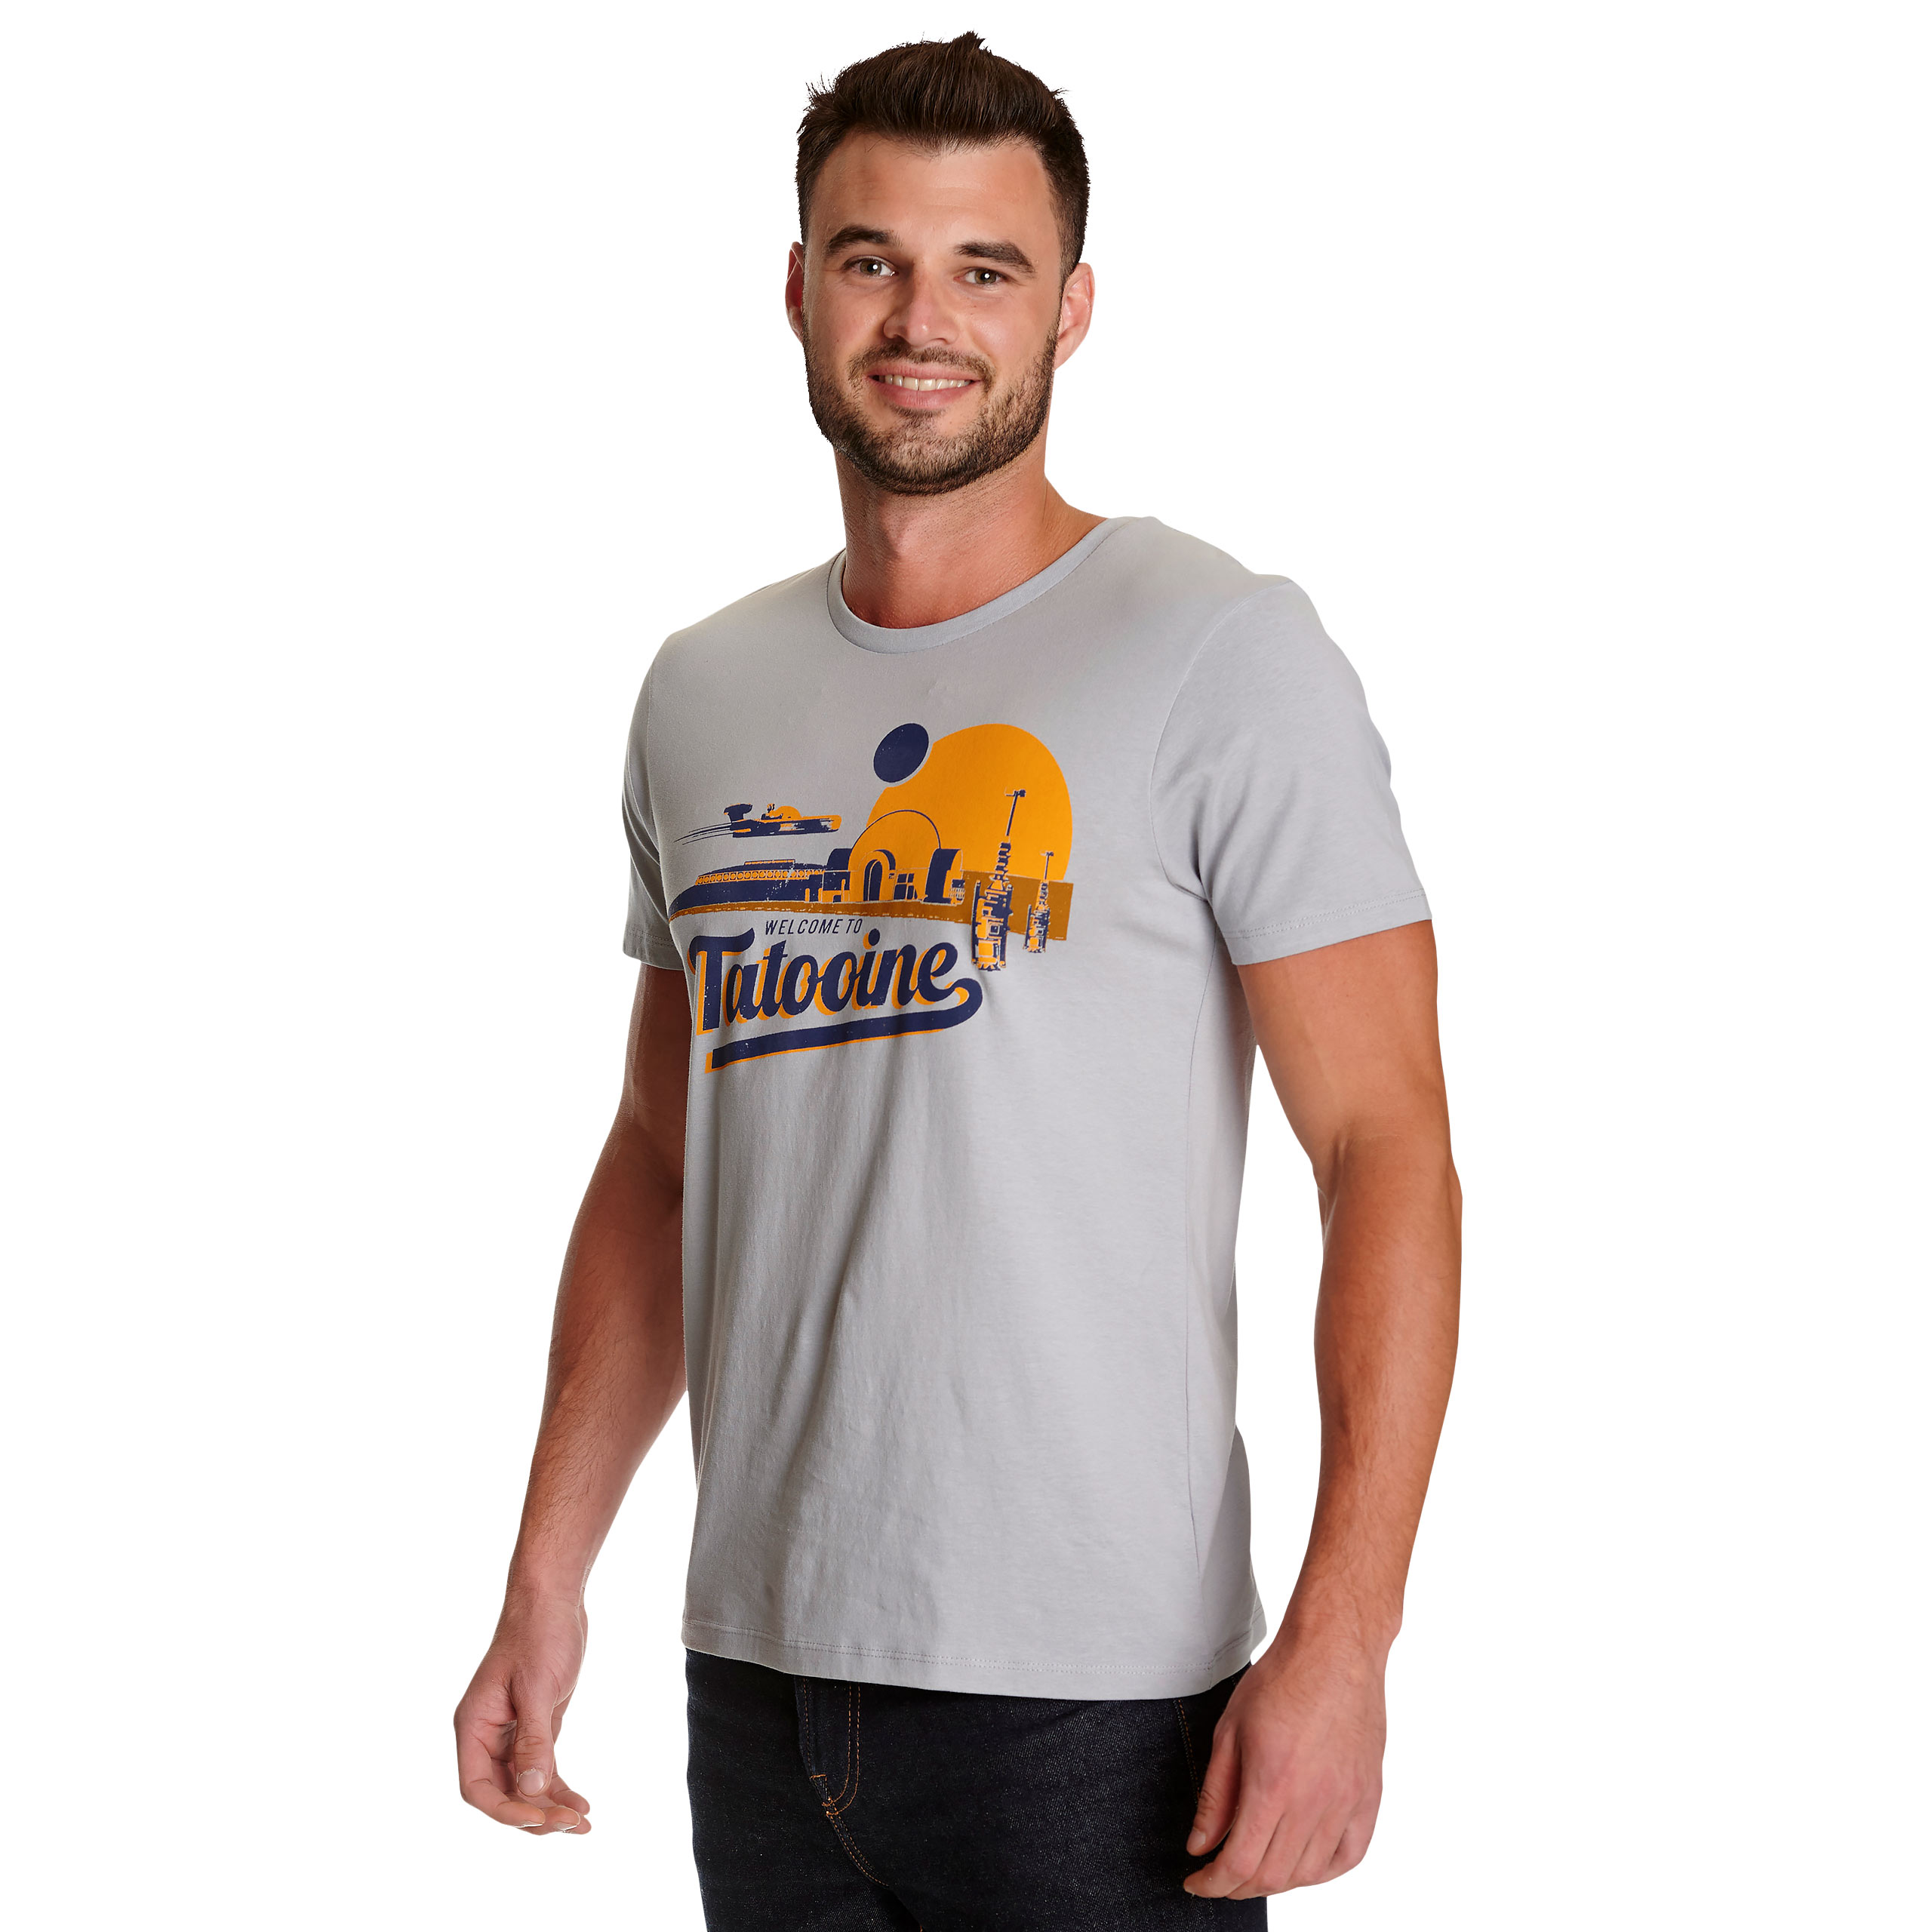 Star Wars - T-shirt Welcome to Tatooine gris